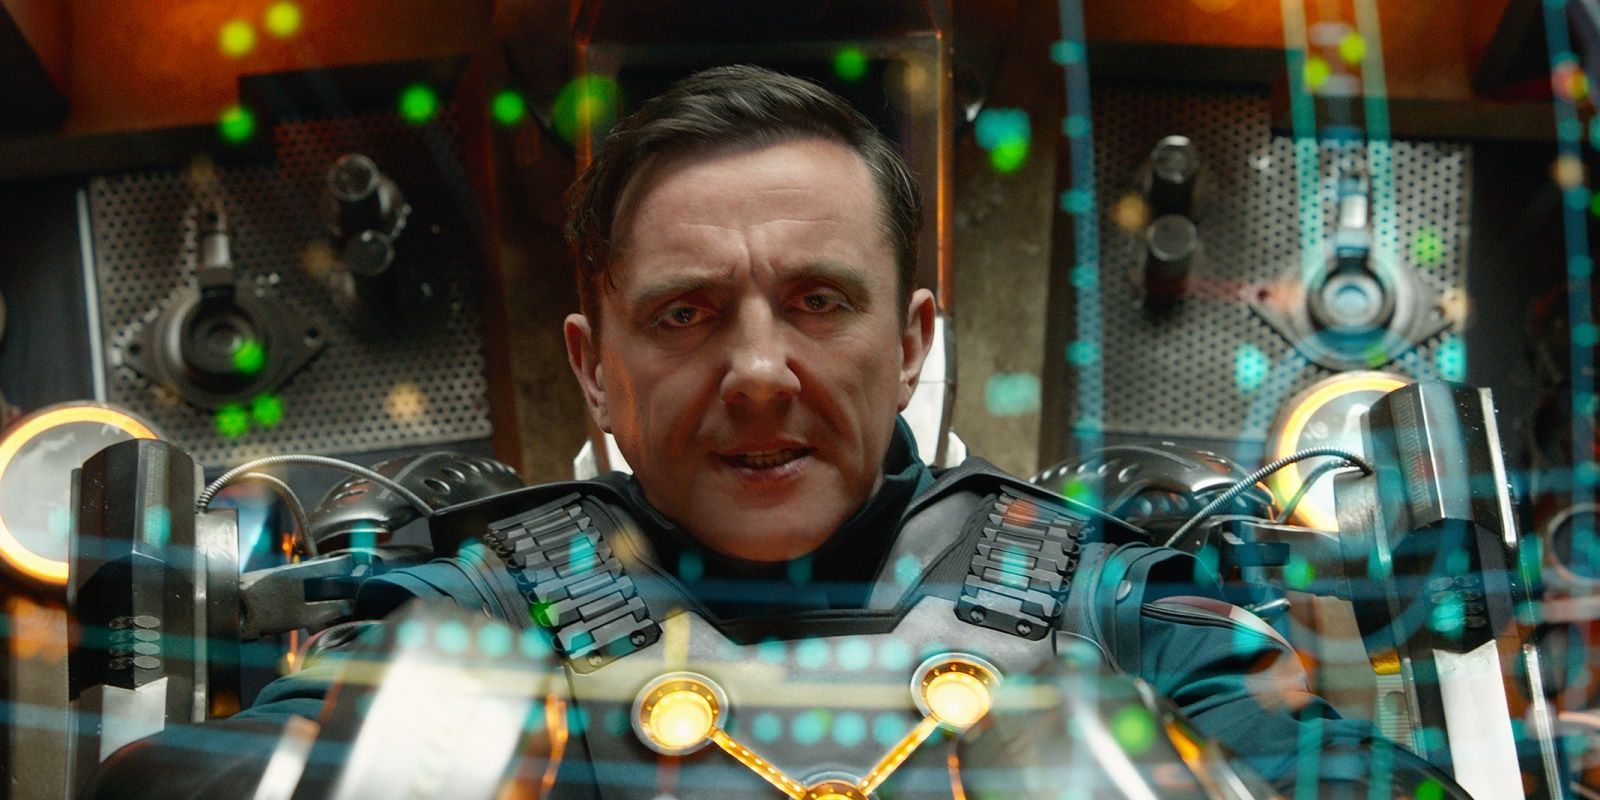 Peter Serafinowicz is The Tick in Amazon's Live-Action Series